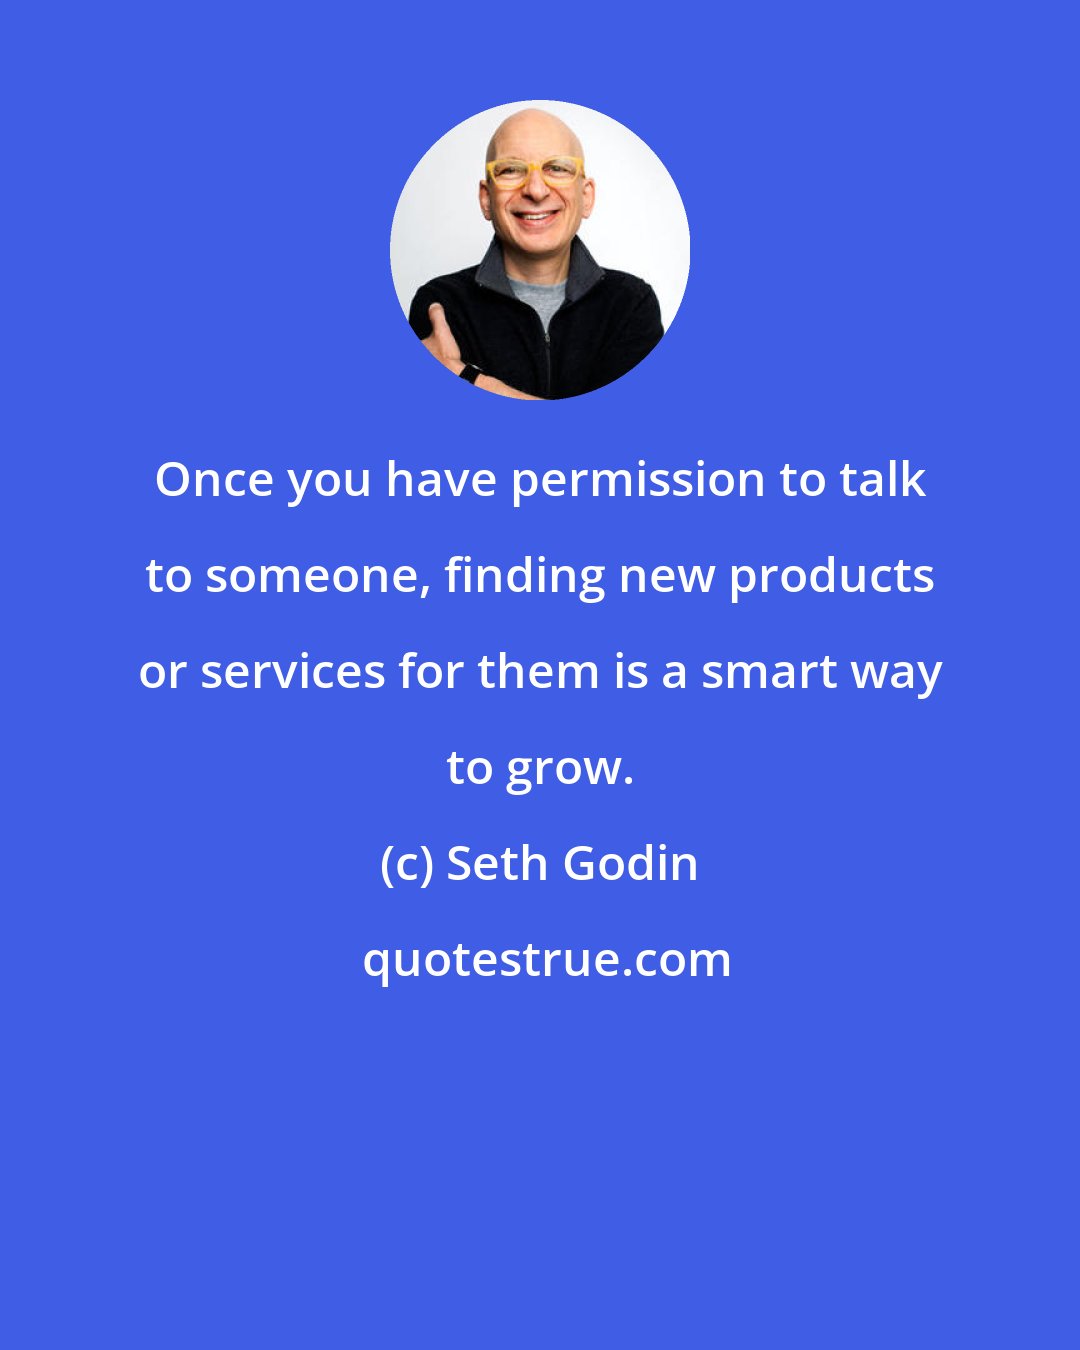 Seth Godin: Once you have permission to talk to someone, finding new products or services for them is a smart way to grow.